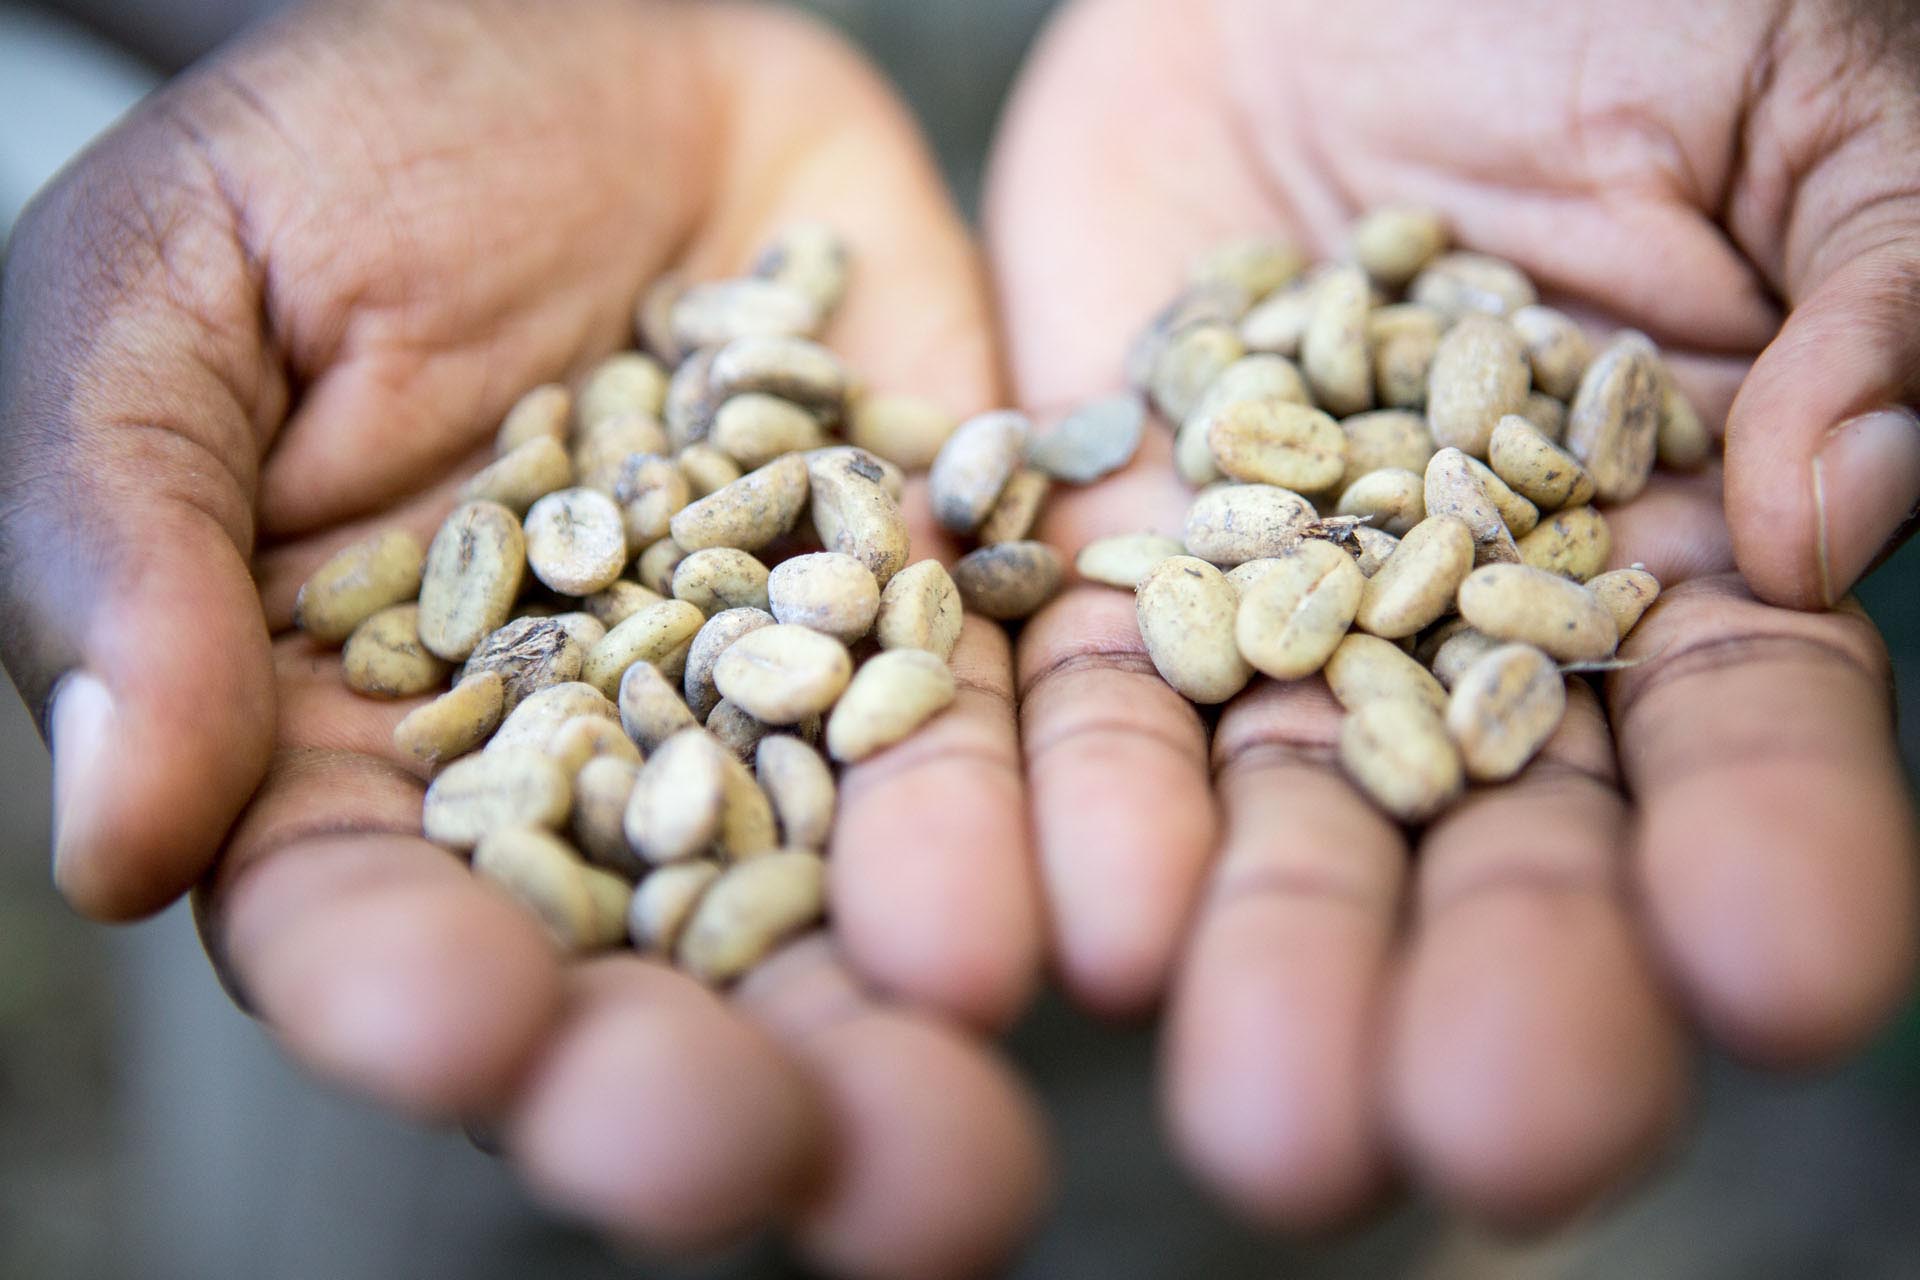 Unroasted coffee beans, fresh from the plantation